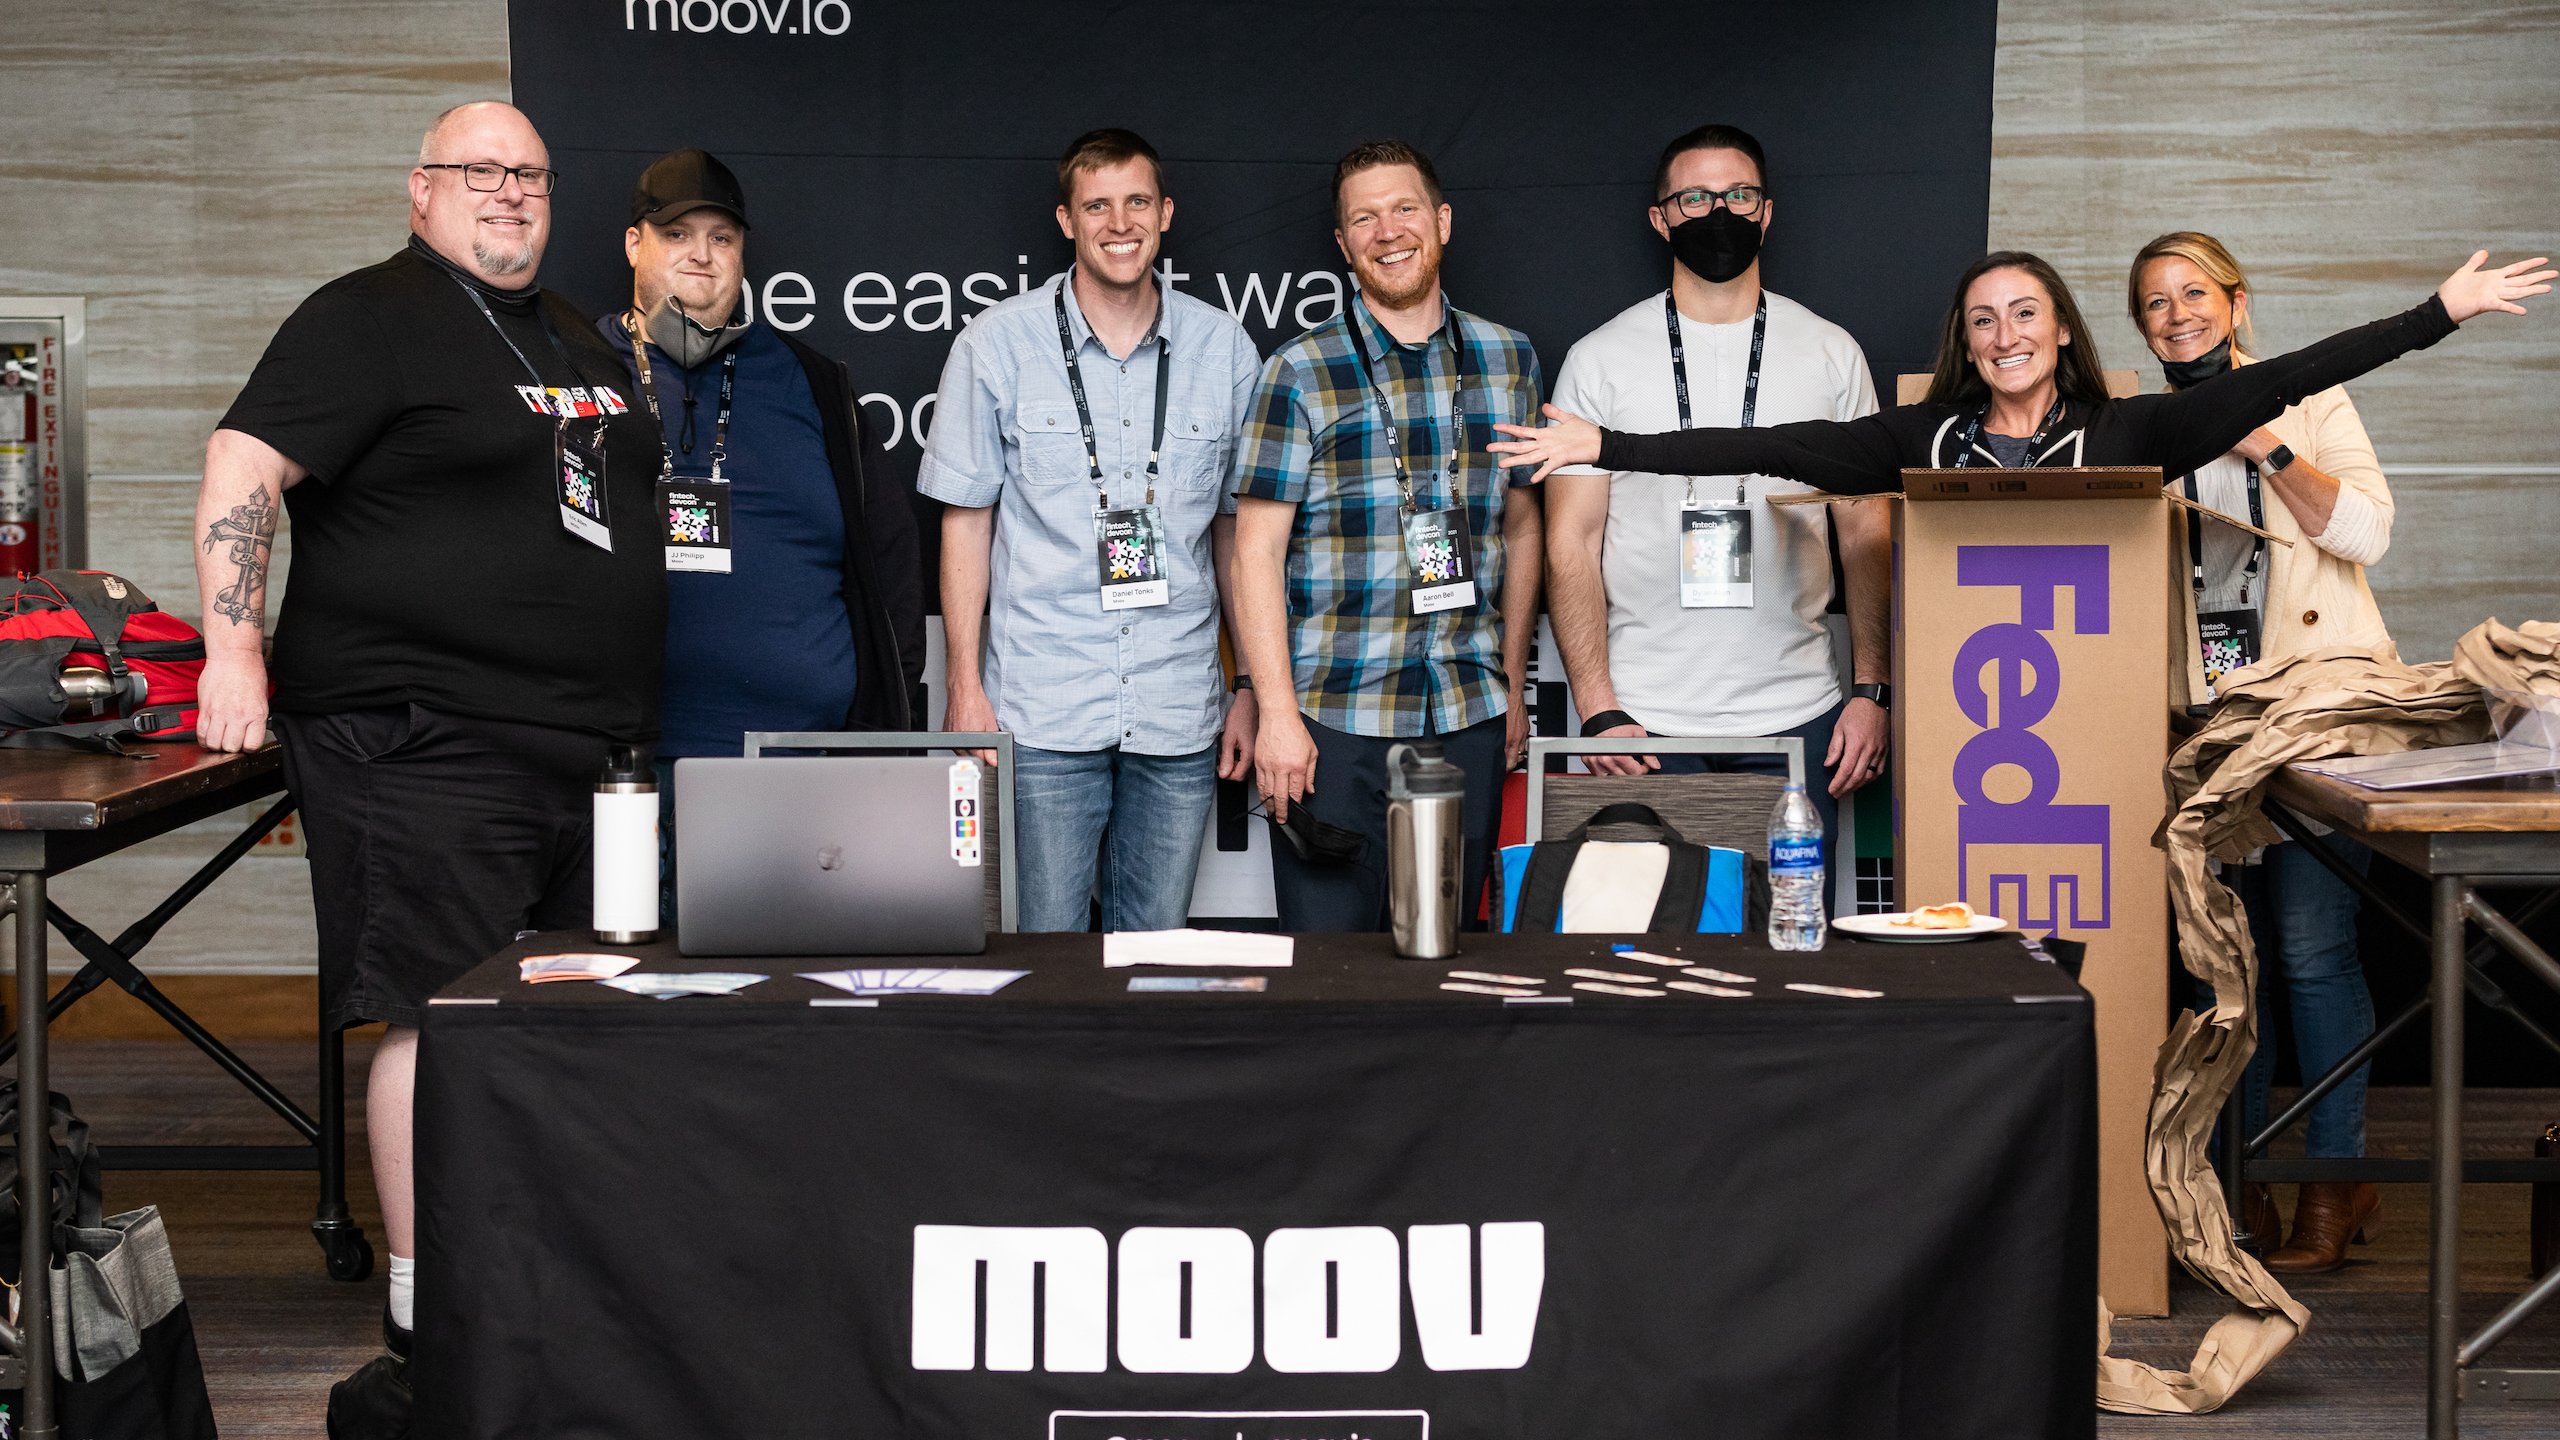 Moov Financial team members at a conference booth.